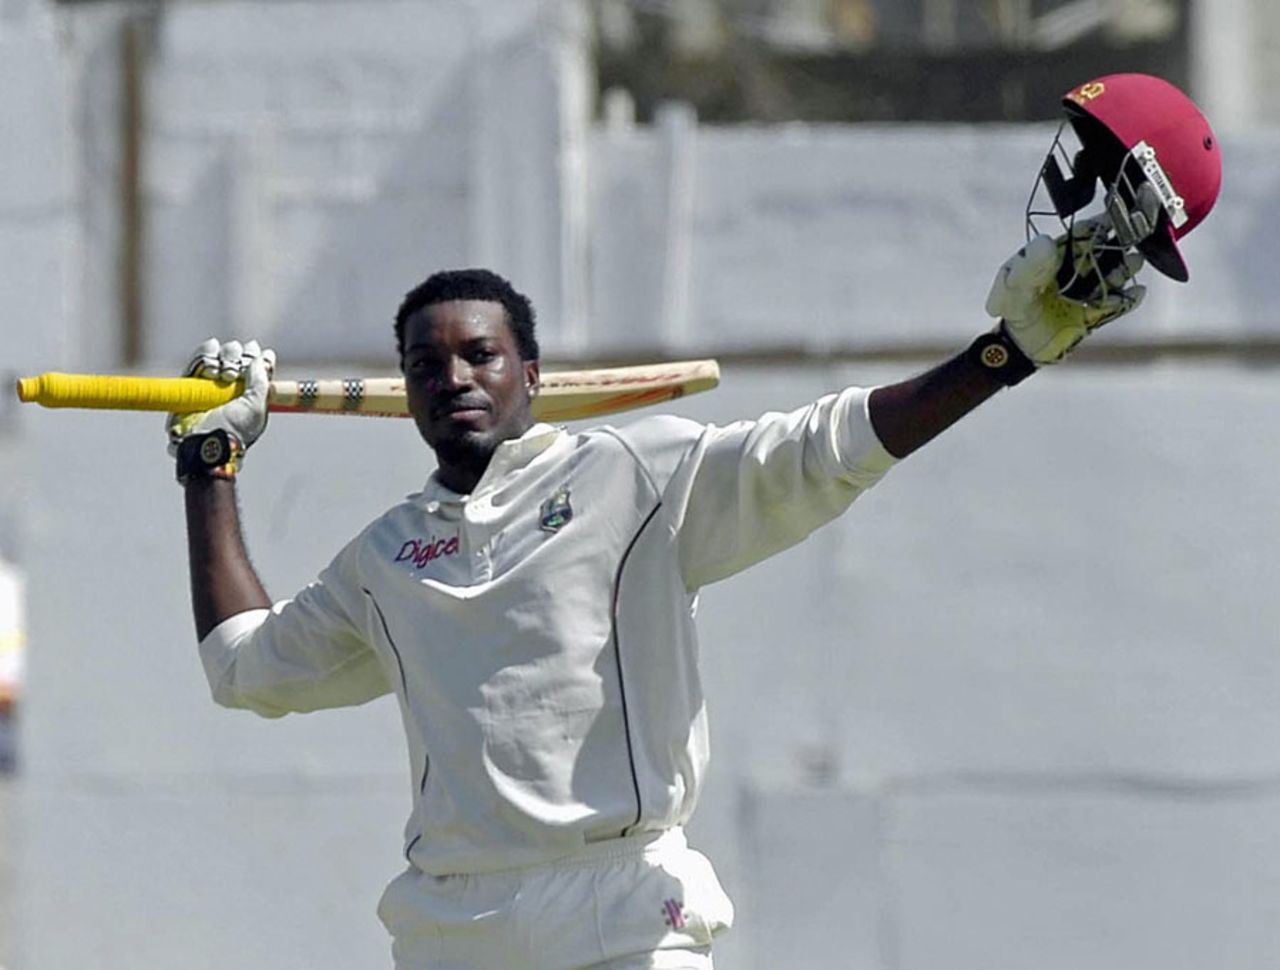 Chris Gayle raises his bat after scoring a hundred, West Indies v South Africa, 4th Test, 4th day, St John's Antigua, May 2, 2005